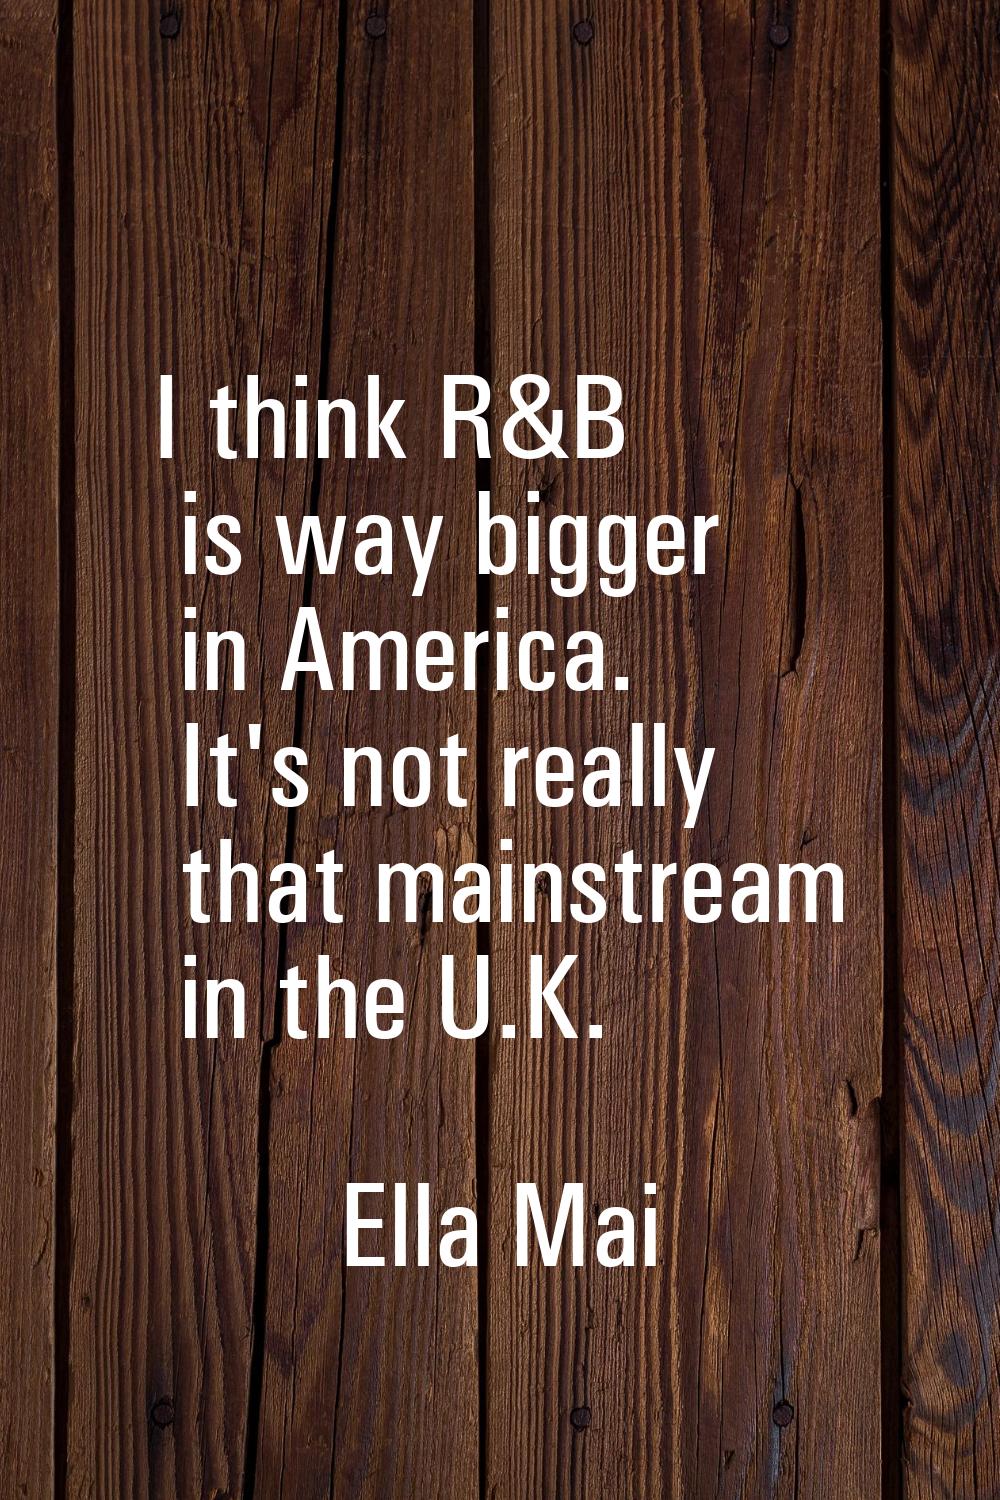 I think R&B is way bigger in America. It's not really that mainstream in the U.K.